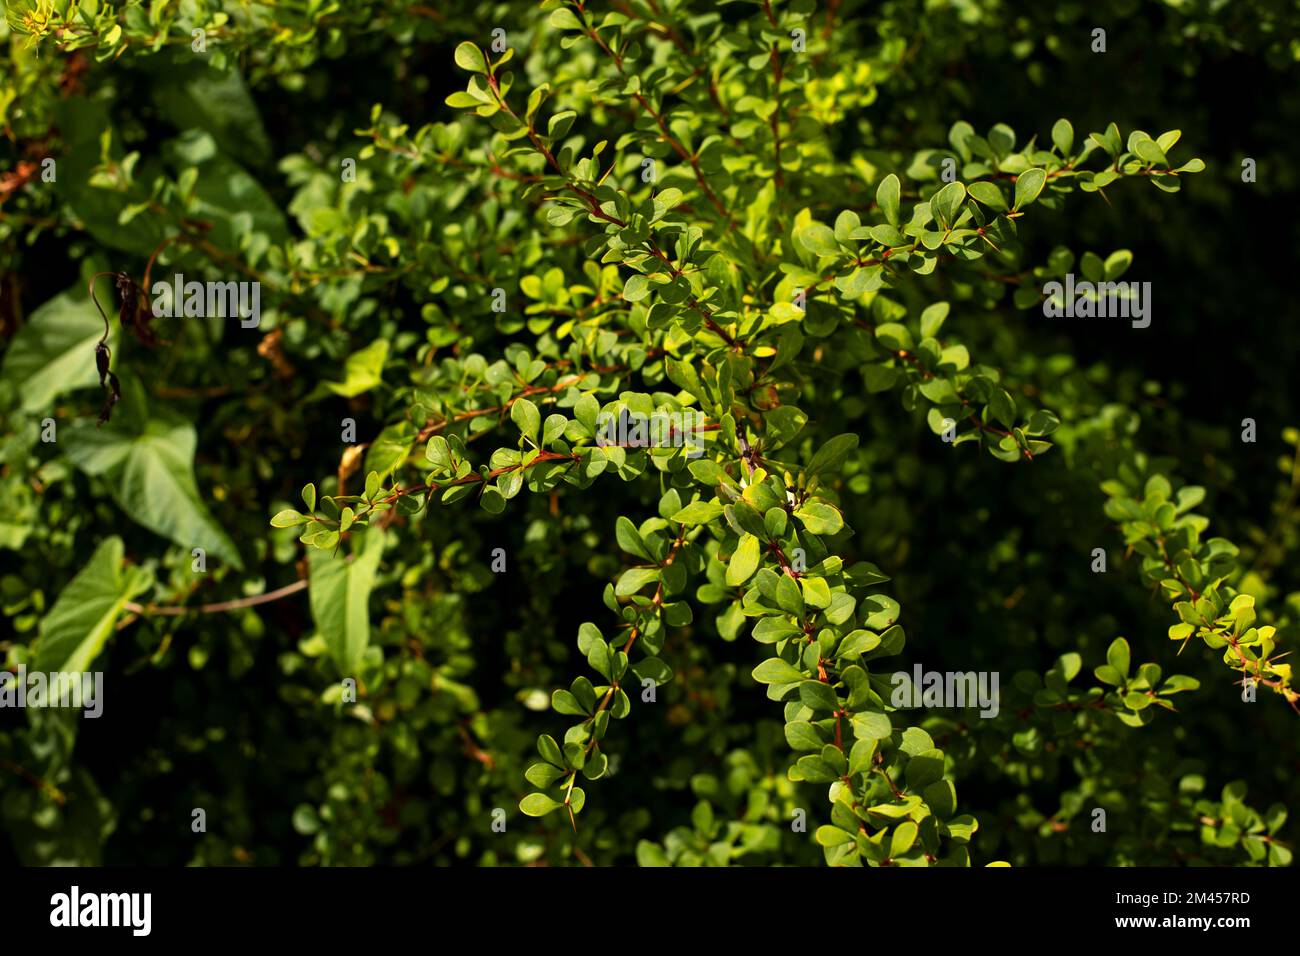 Green bush. Thin branches with small leaves. Details of nature in park. Garden plant. Stock Photo